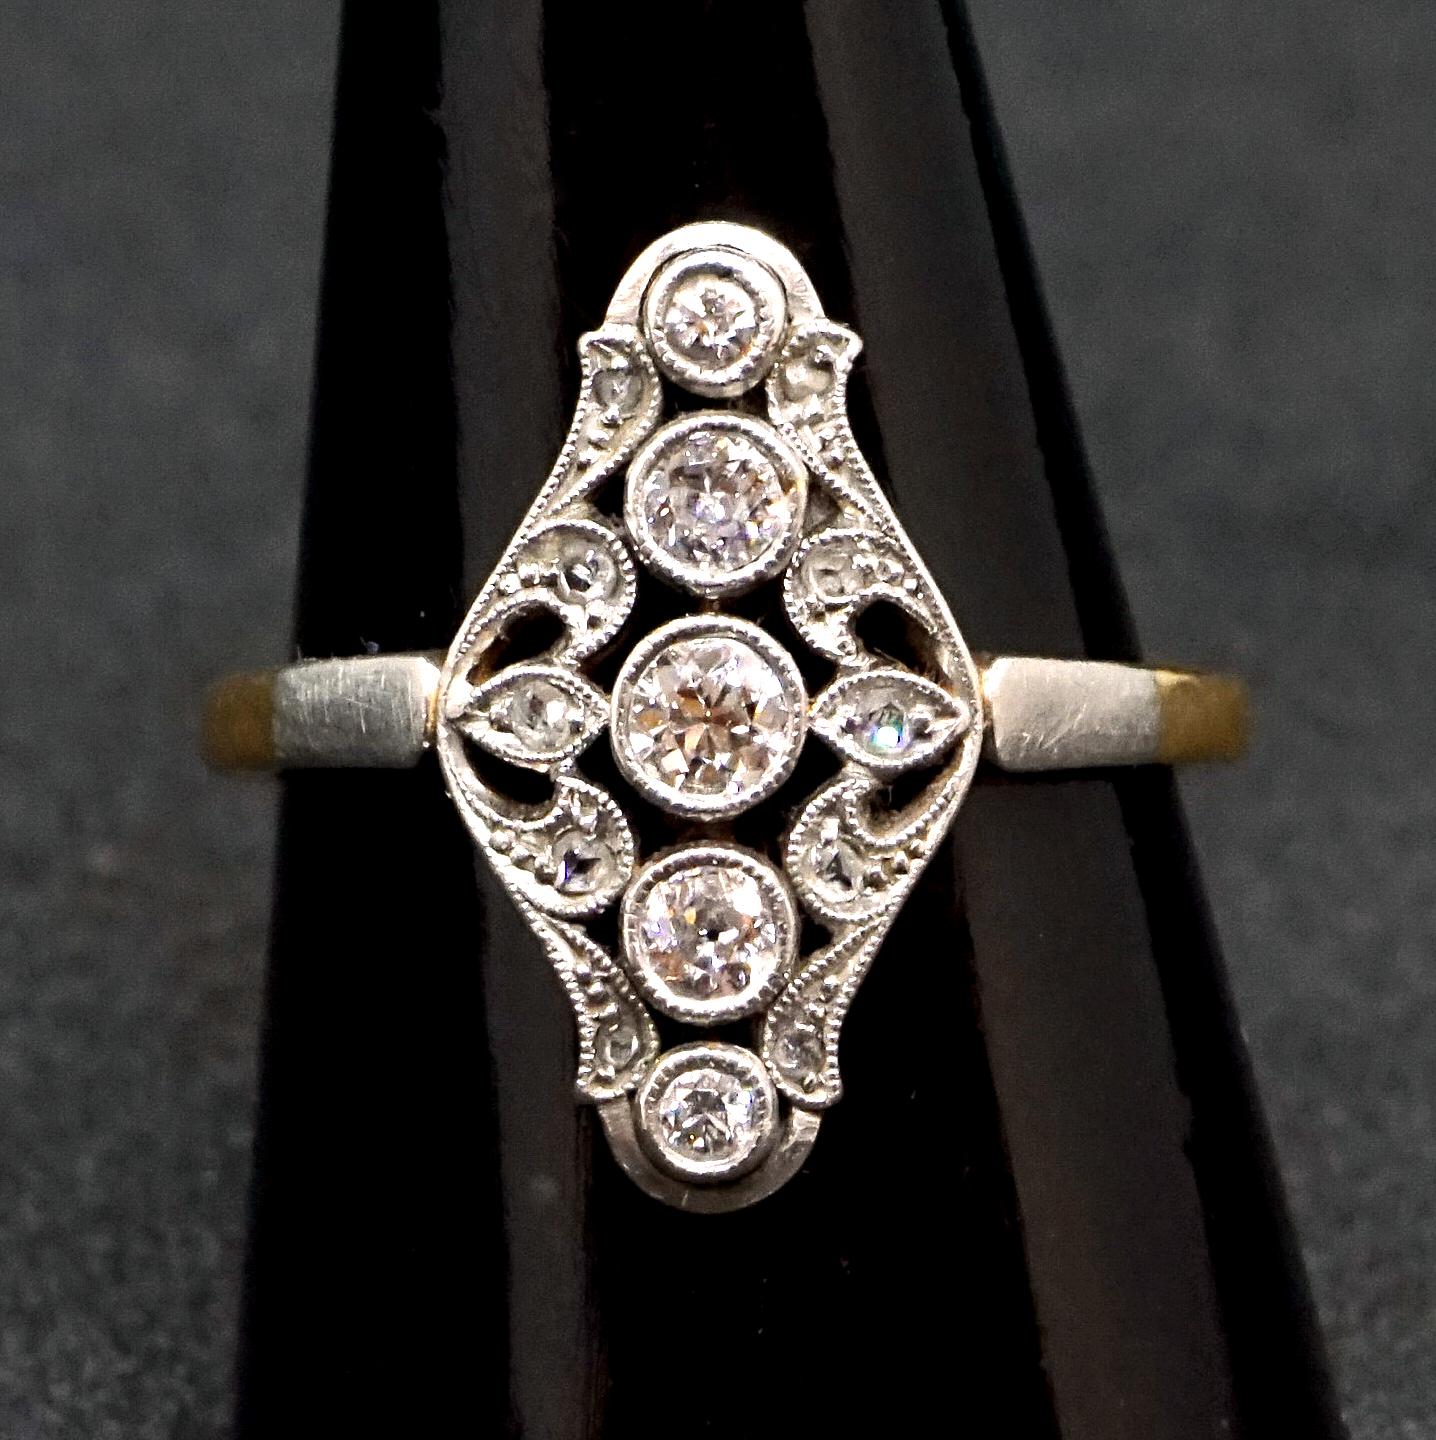 Delicate antique navette-shaped old brilliant-cut diamond ring:
five old brilliant-cut diamonds in a row, surounded by further small diamonds set in a floral openwork millegrain edge collet, all diamonds estimated to weigh a total of 0.6 carat, claw